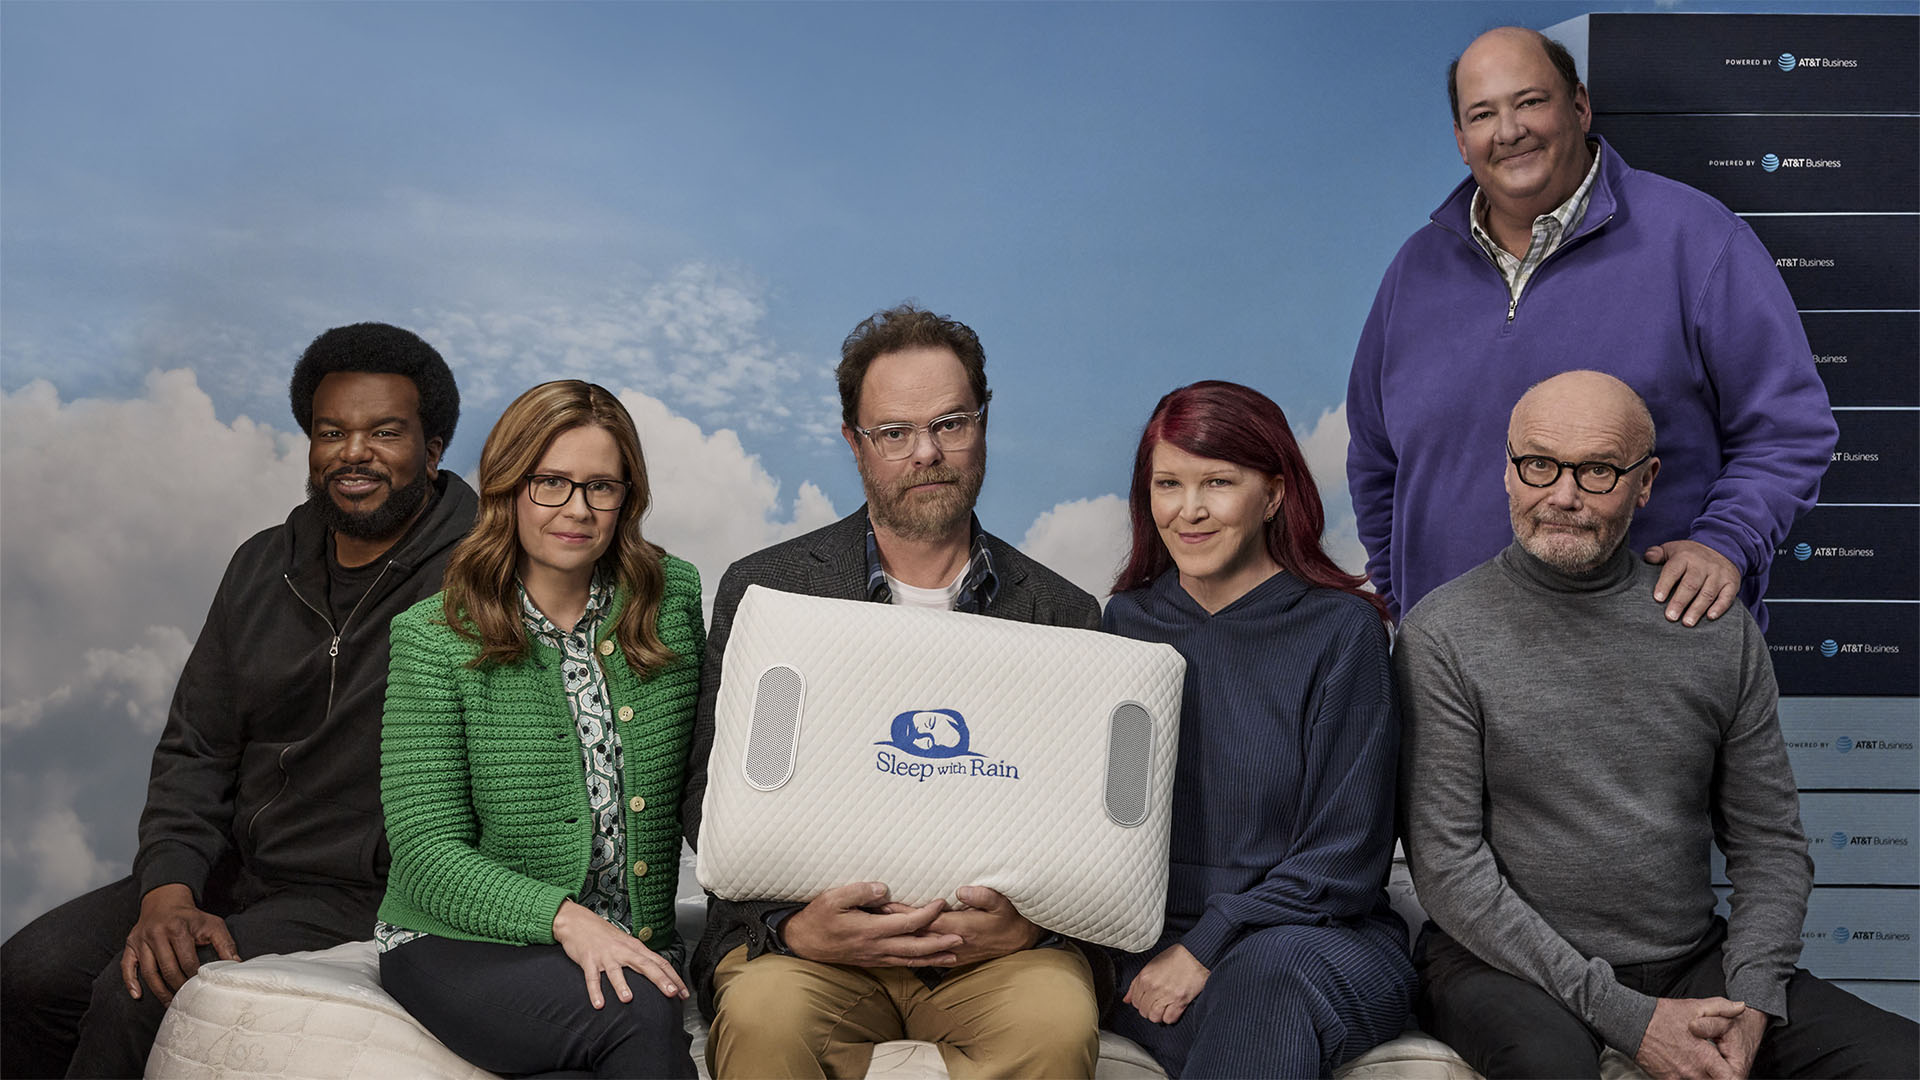 Dwight’s Soothing Solution: The Office Gang Launches a Sleep Pillow Campaign with AT&T Business